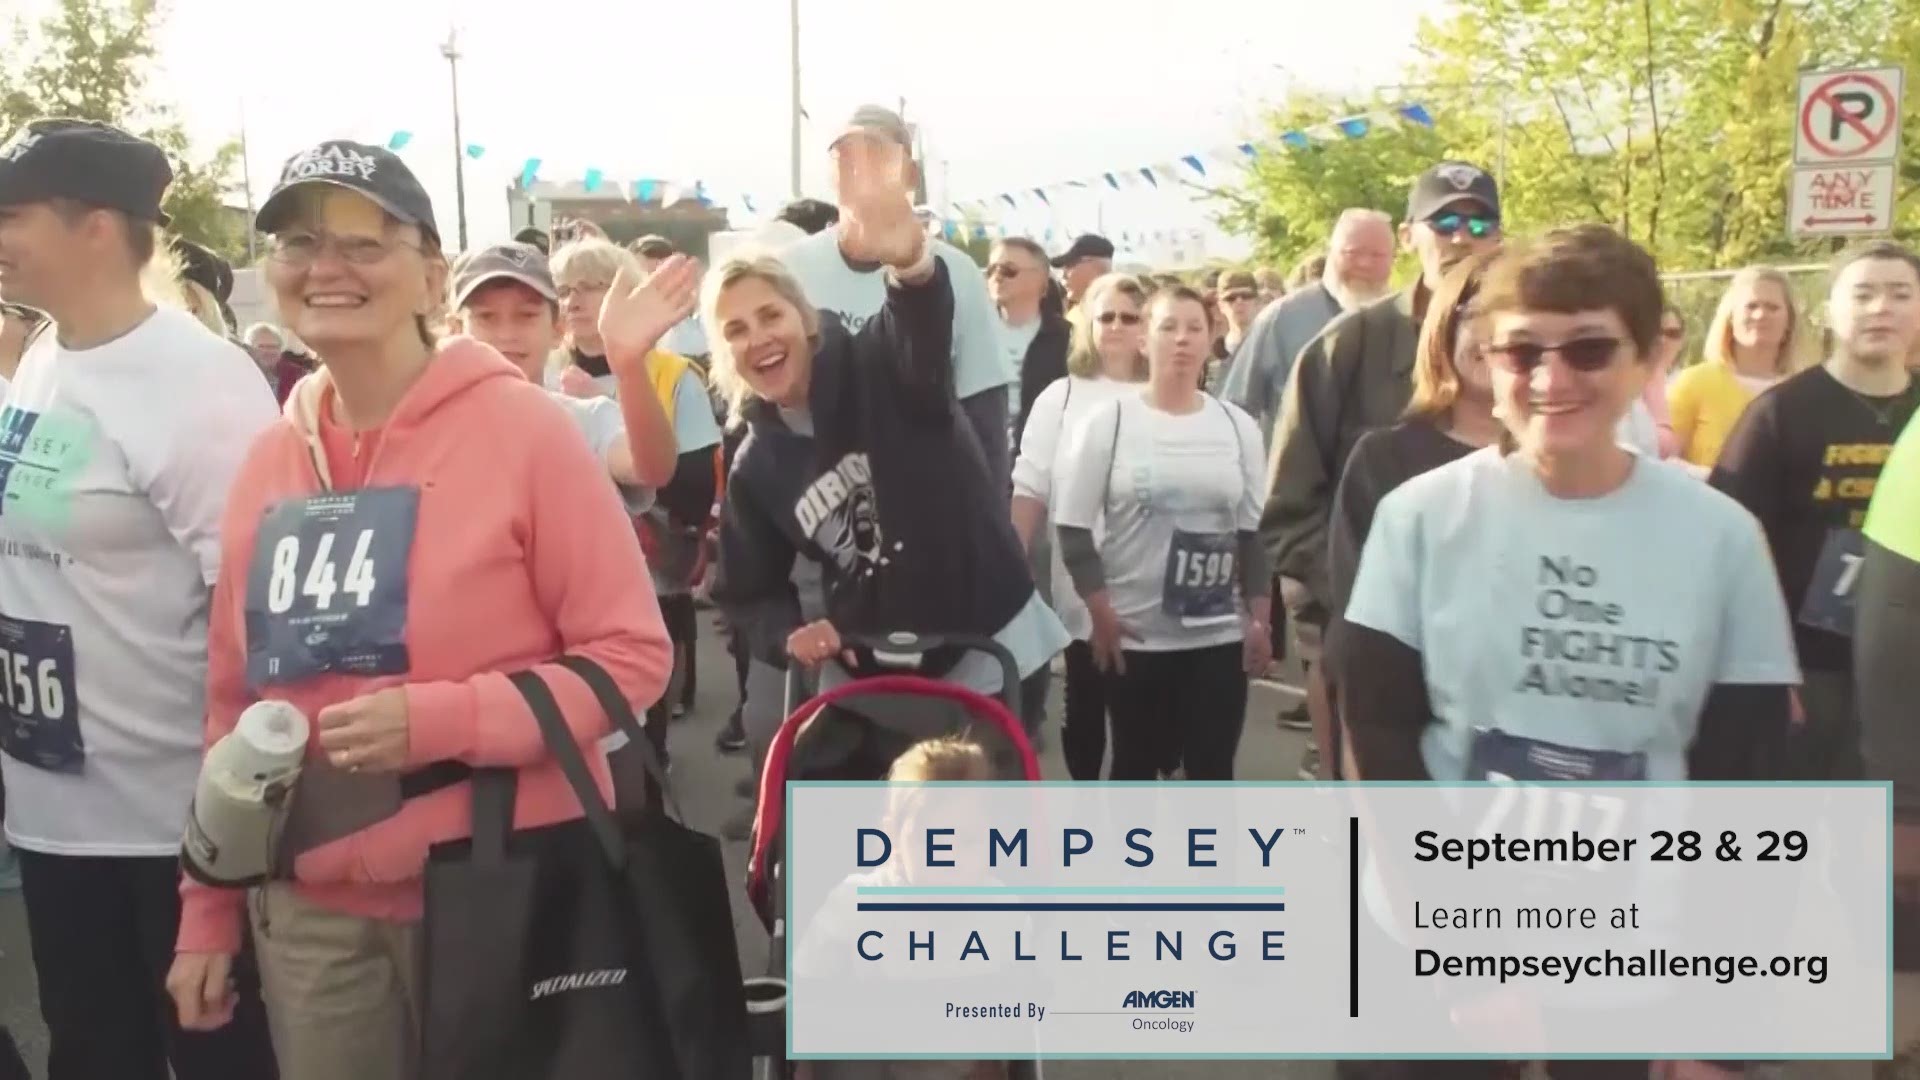 Stop by Simard - Payne Park in Lewiston on September 28-29 for the 11th annual Dempsey Challenge.  NEWS CENTER Maine will be there reporting live during the Weekend Morning Report. More information at DempseyChallenge.org.